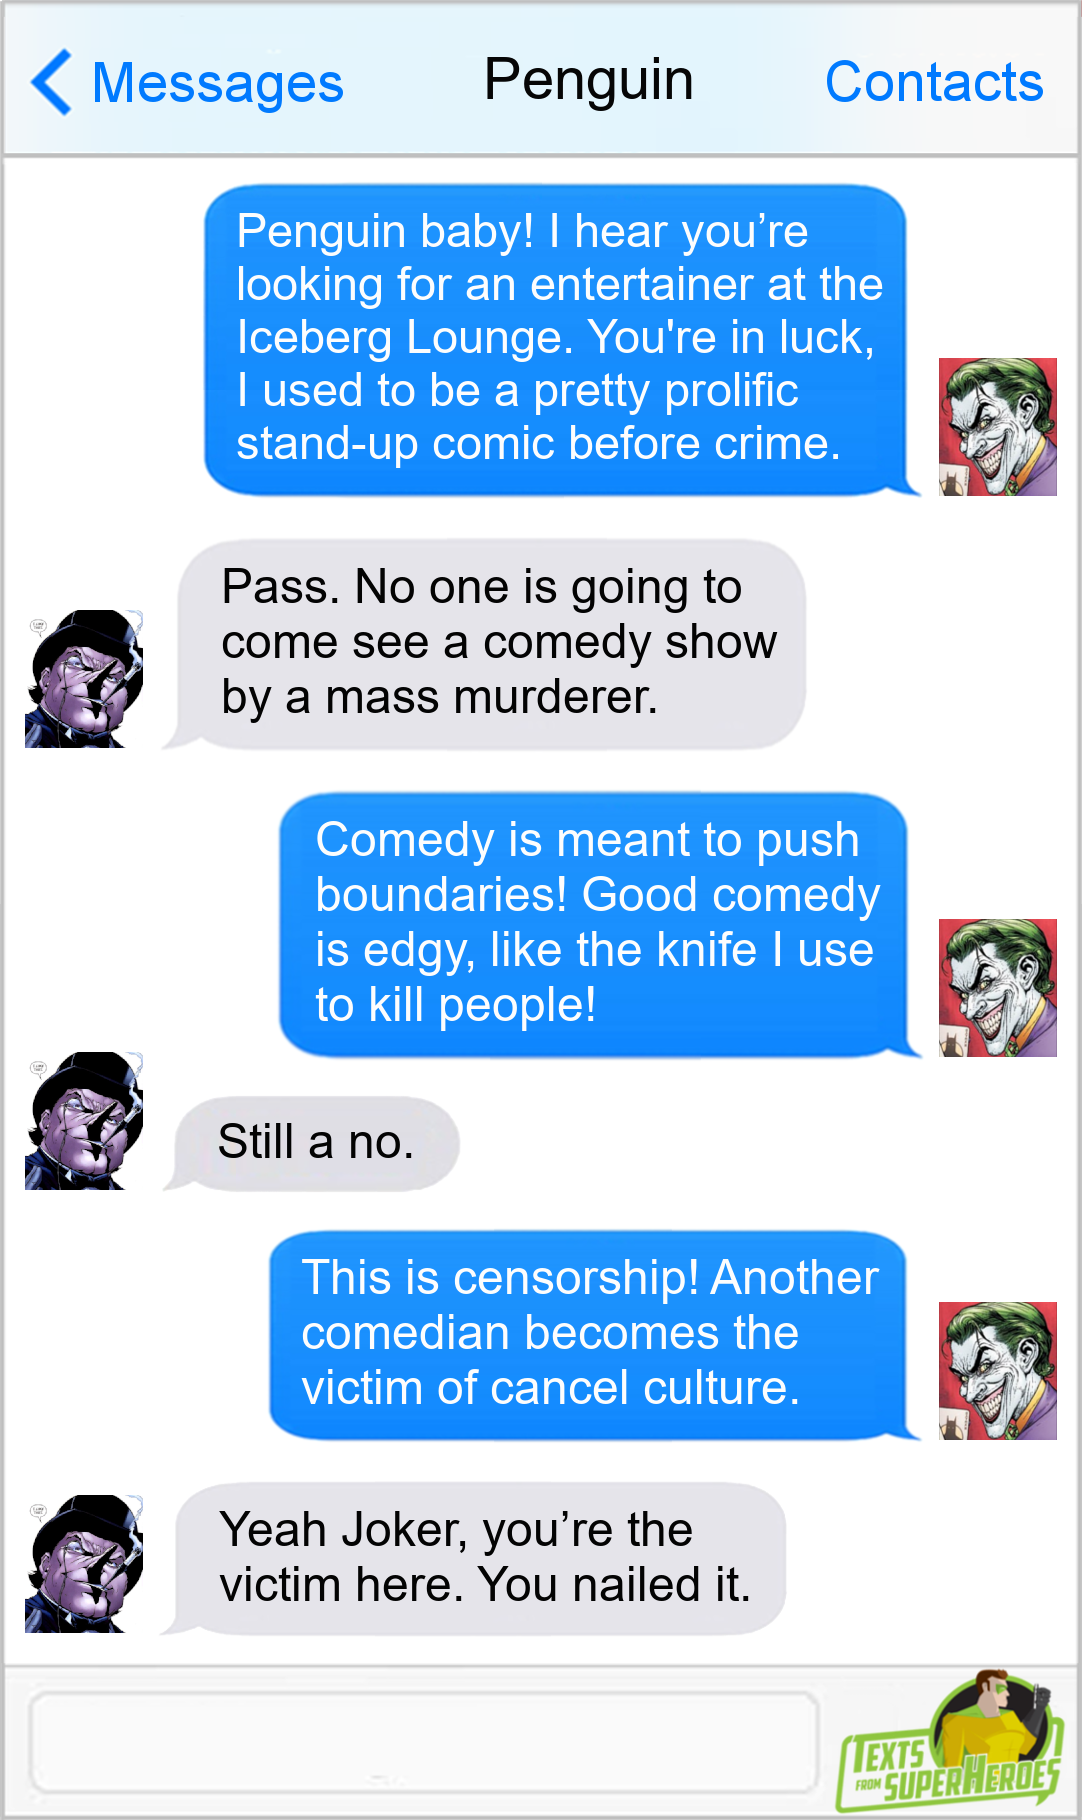 Texts From Superheroes
Facebook | Twitter | Patreon